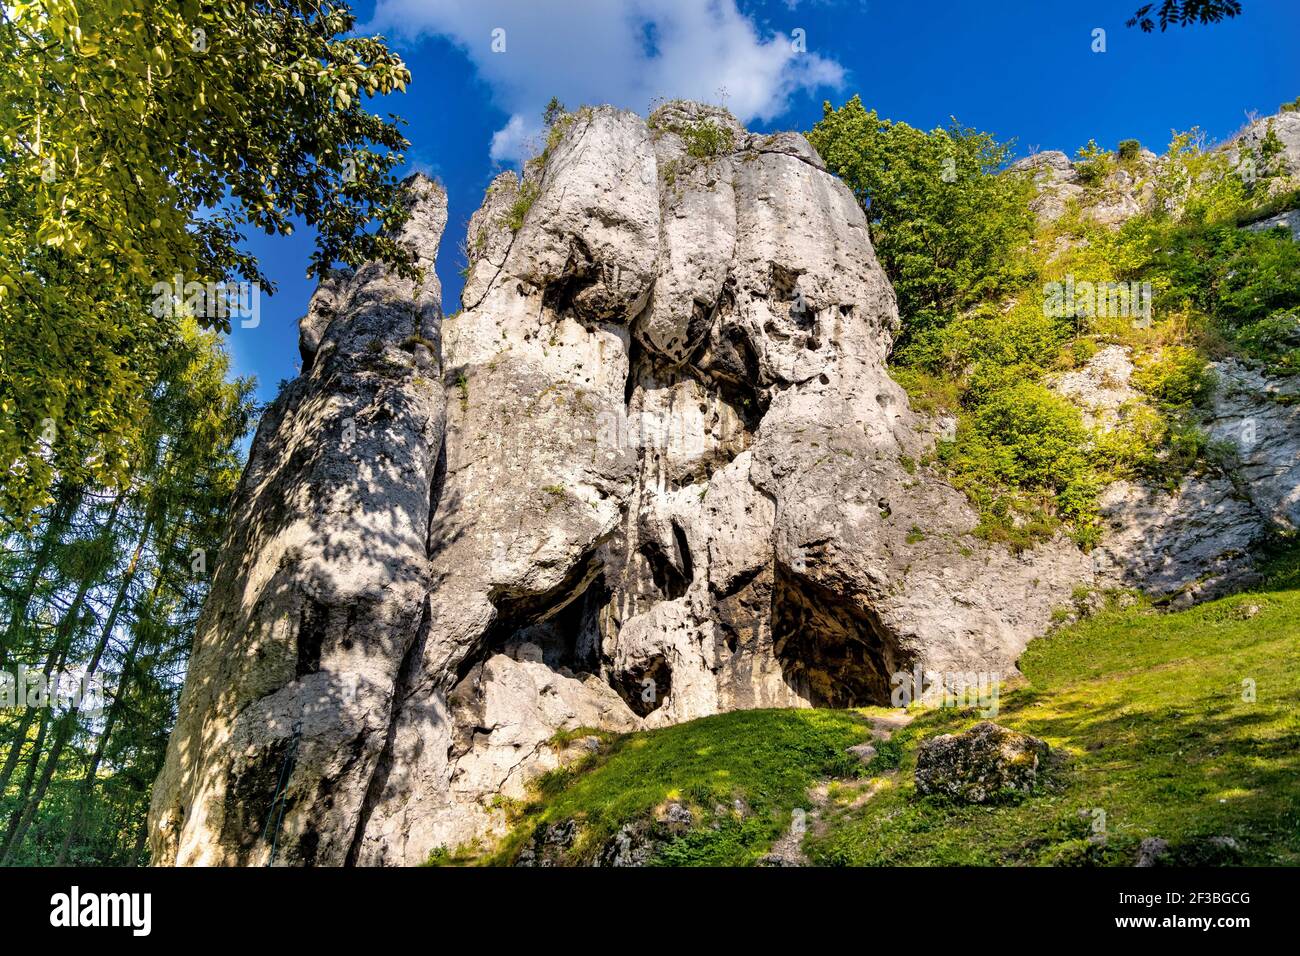 Jurassic limestone rock formations and natural caves in Gora Birow Mountain near Ogrodzieniec Castle, in Podzamcze at Cracow-Czestochowa upland in Sil Stock Photo